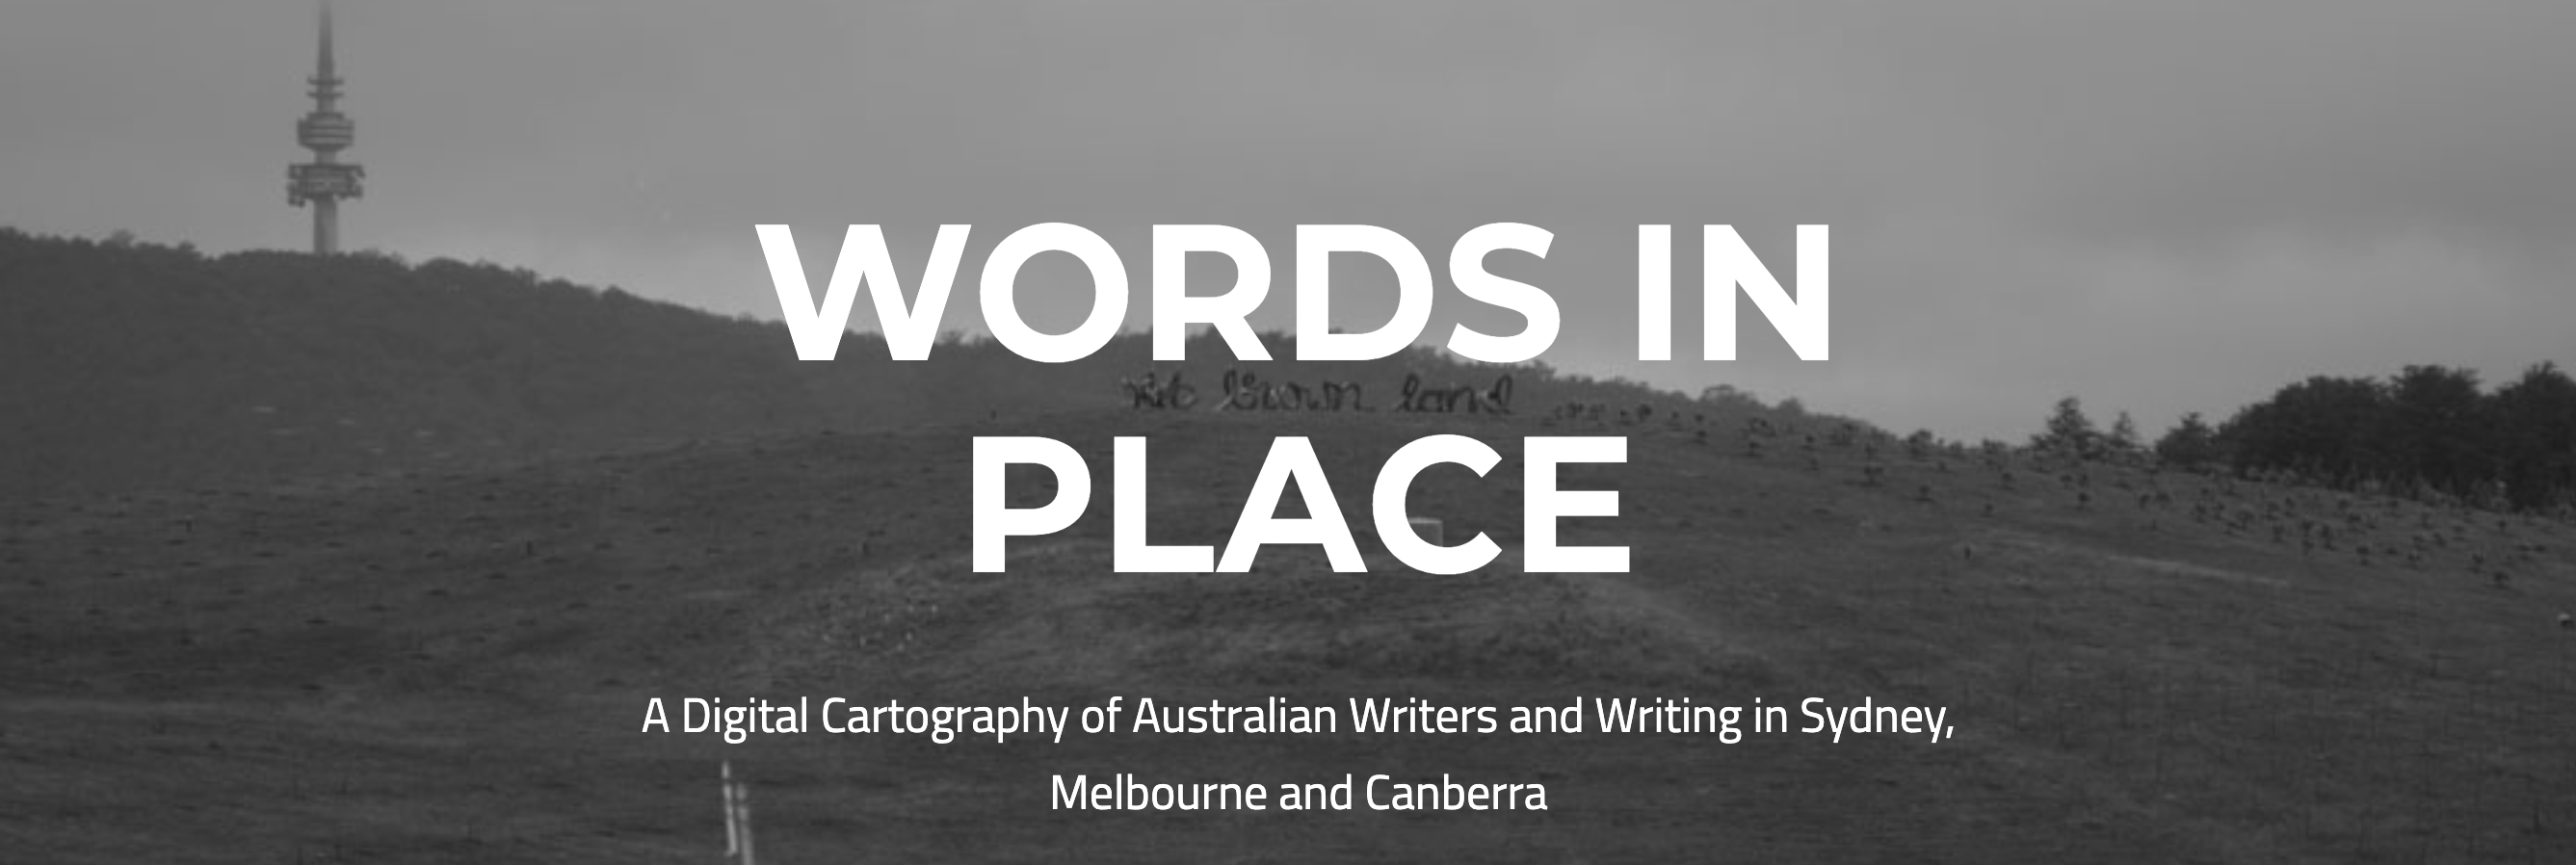 Screenshot from the Words in Place website. In the background is a black and white landscape. In the foreground, it reads "Words in Place: A Digital Cartography of Australian Writers and Writing in Sydney, Melbourne and Canberra"